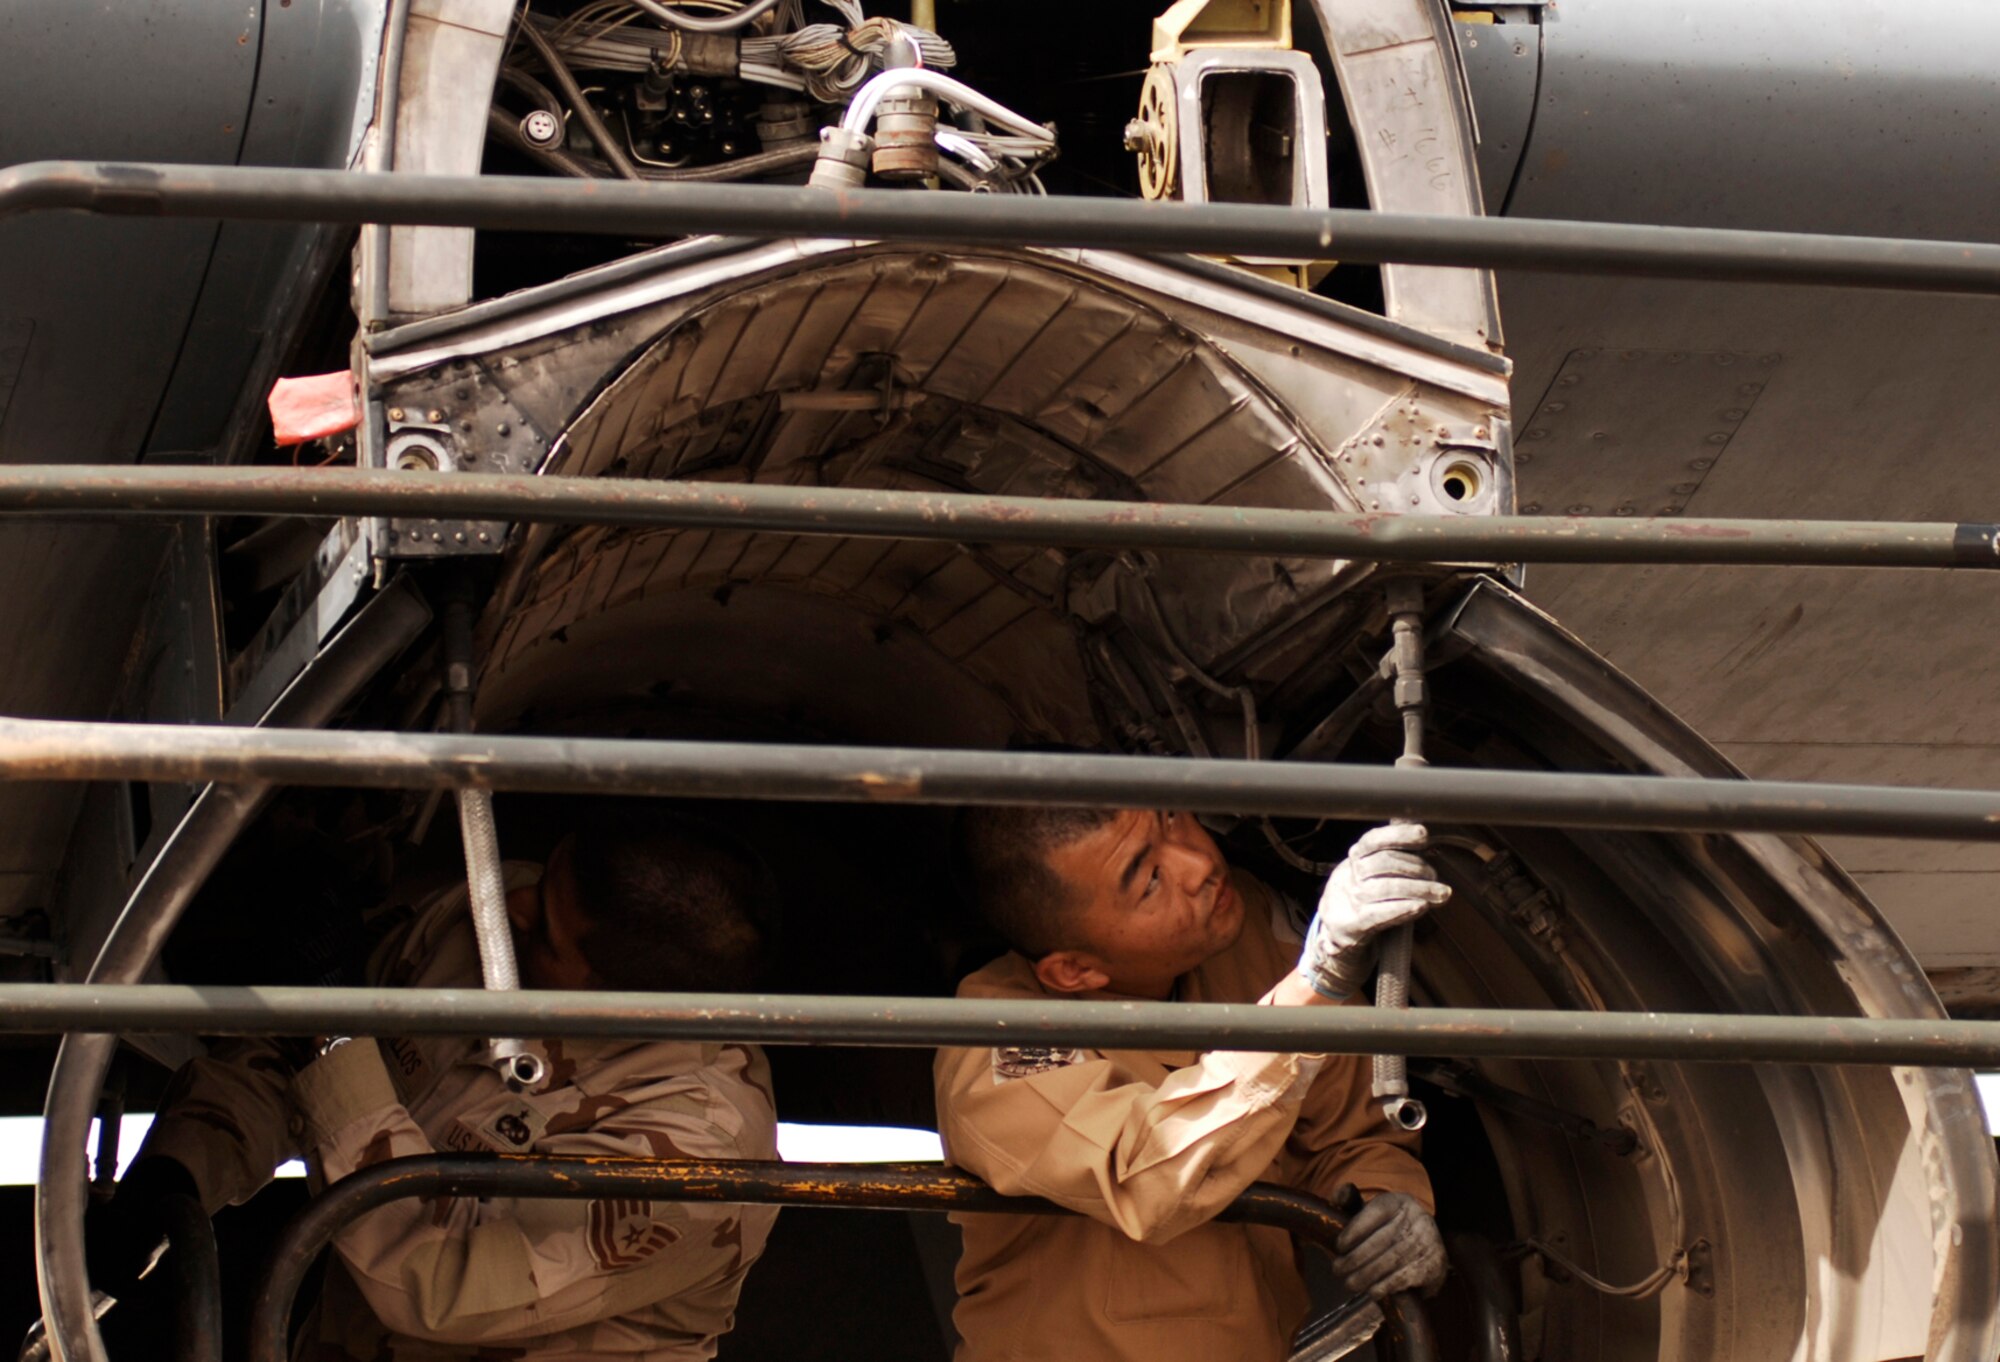 SOUTHWEST ASIA -- Technical Sgt. Porfirio Bustillos (left), a maintainer deployed to the 386th Expeditionary Aircraft Maintenance Squadron, and Staff Sgt. Kouichi Tsunoda, a maintainer from the Japan Air Self-Defense Force Iraq Reconstruction Support Airlift Wing Maintenance Squadron, inspect an engine insulation blanket for cracks, holes, and deterioration on an U.S. Air Force C-130 Hercules March 21, 2008, at an air base in the Persian Gulf Region. Airmen from the U.S., JASDF, and Republic of Korea Air Force 58th Airlift Wing participated in a coalition maintenance exchange program allowing maintainers to sharpen their skills, exchange ideas, and promote closer relations among coalition air forces supporting the Global War on Terrorism.  (U.S. Air Force photo/ Staff Sgt. Patrick Dixon)